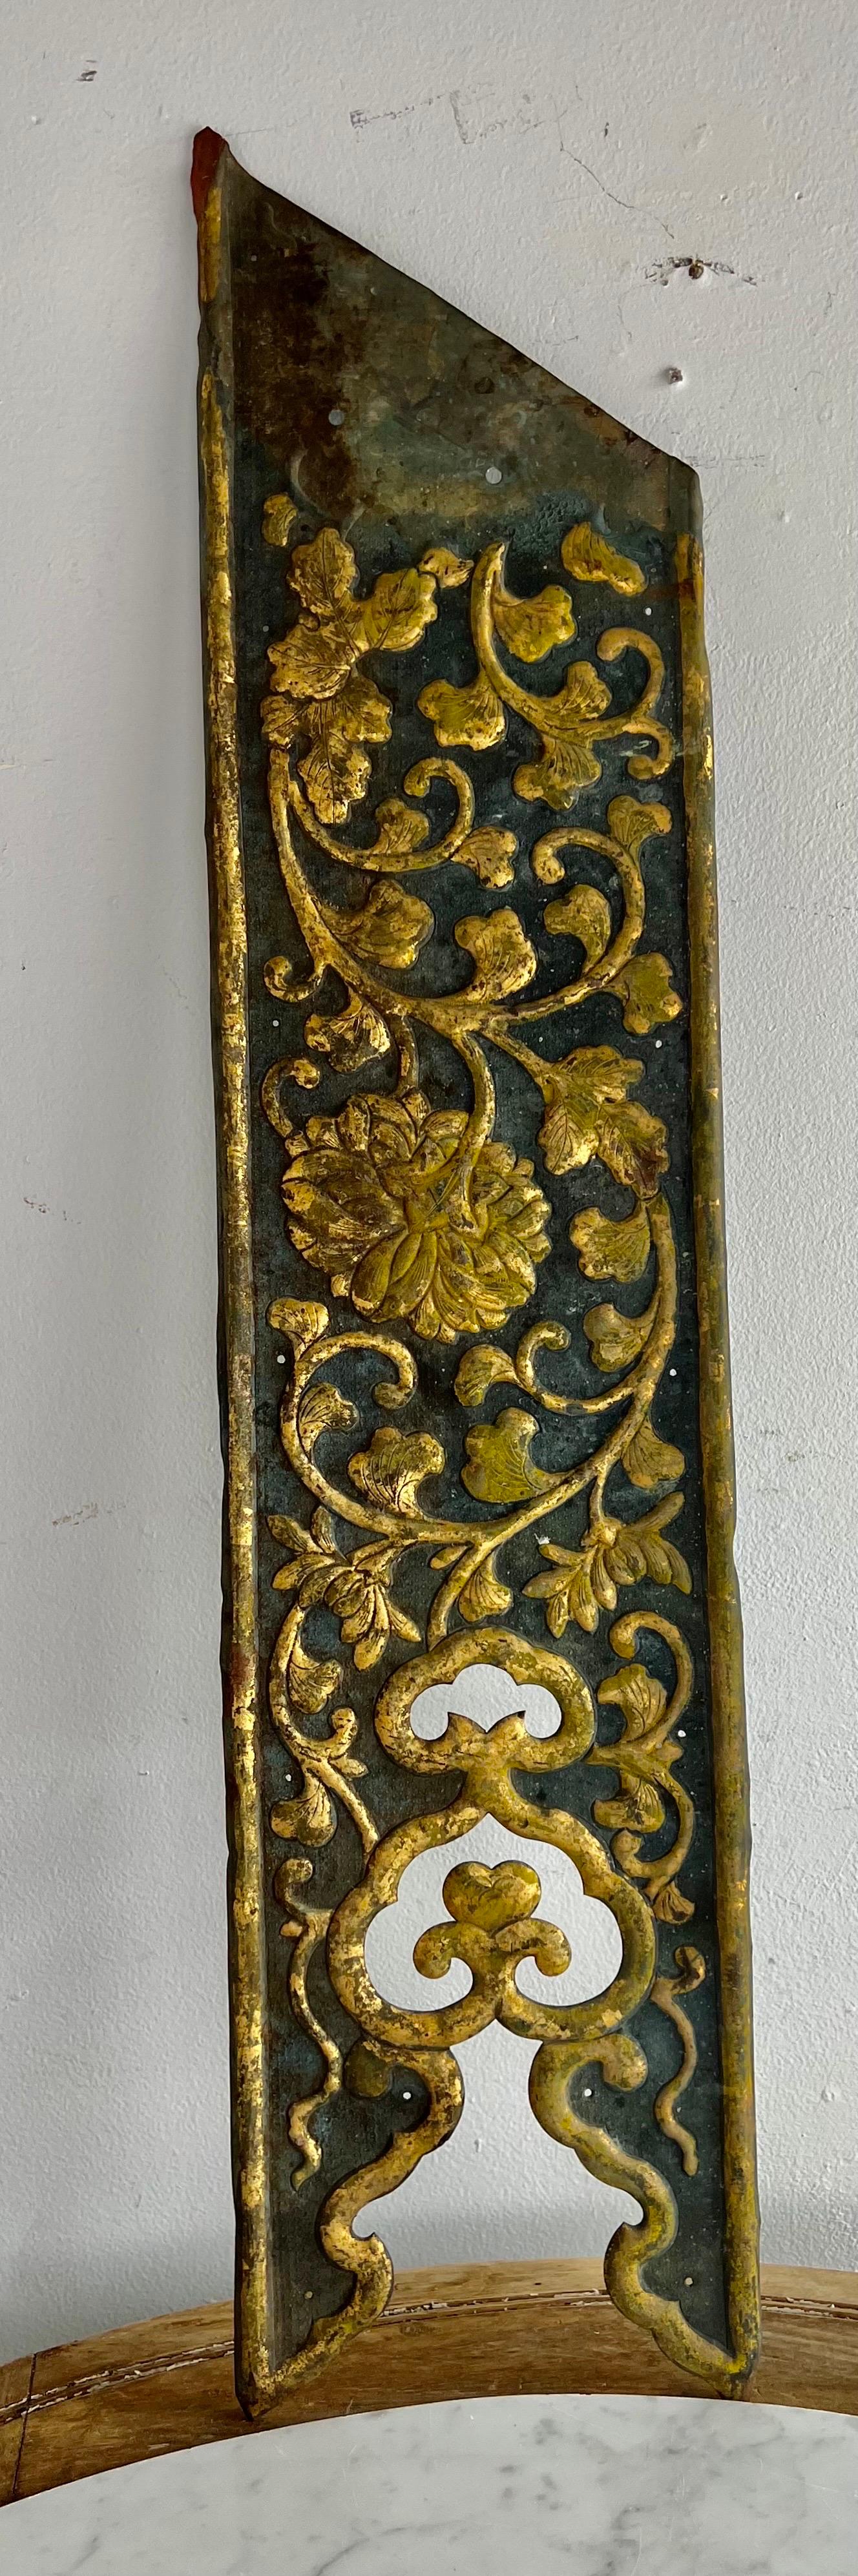 19th century Italian hand hammered painted and parcel gilt metal panel. The panel is decorated with gold leaf flowers swirling throughout.